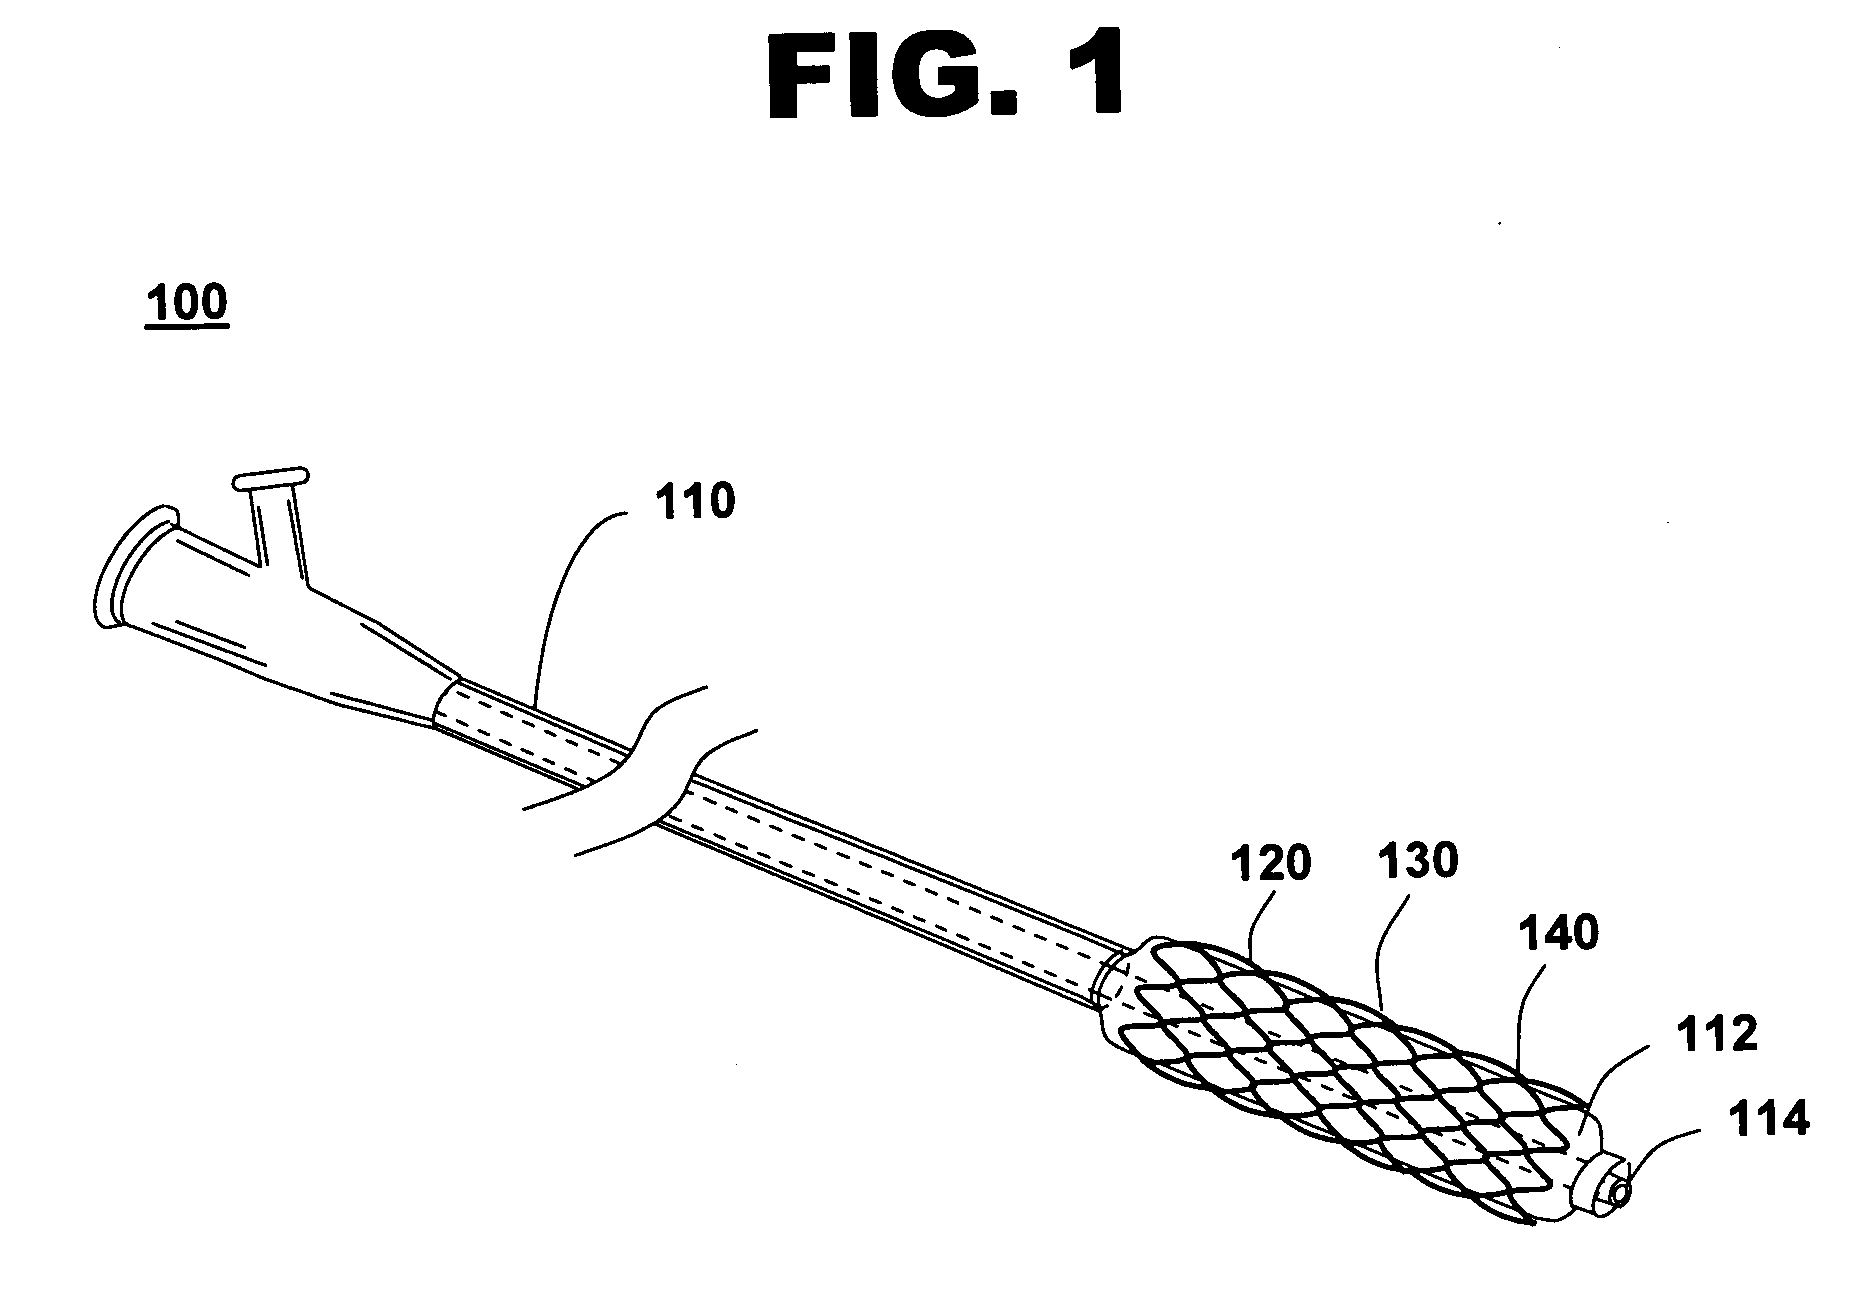 Laminated drug-polymer coated stent with dipped and cured layers